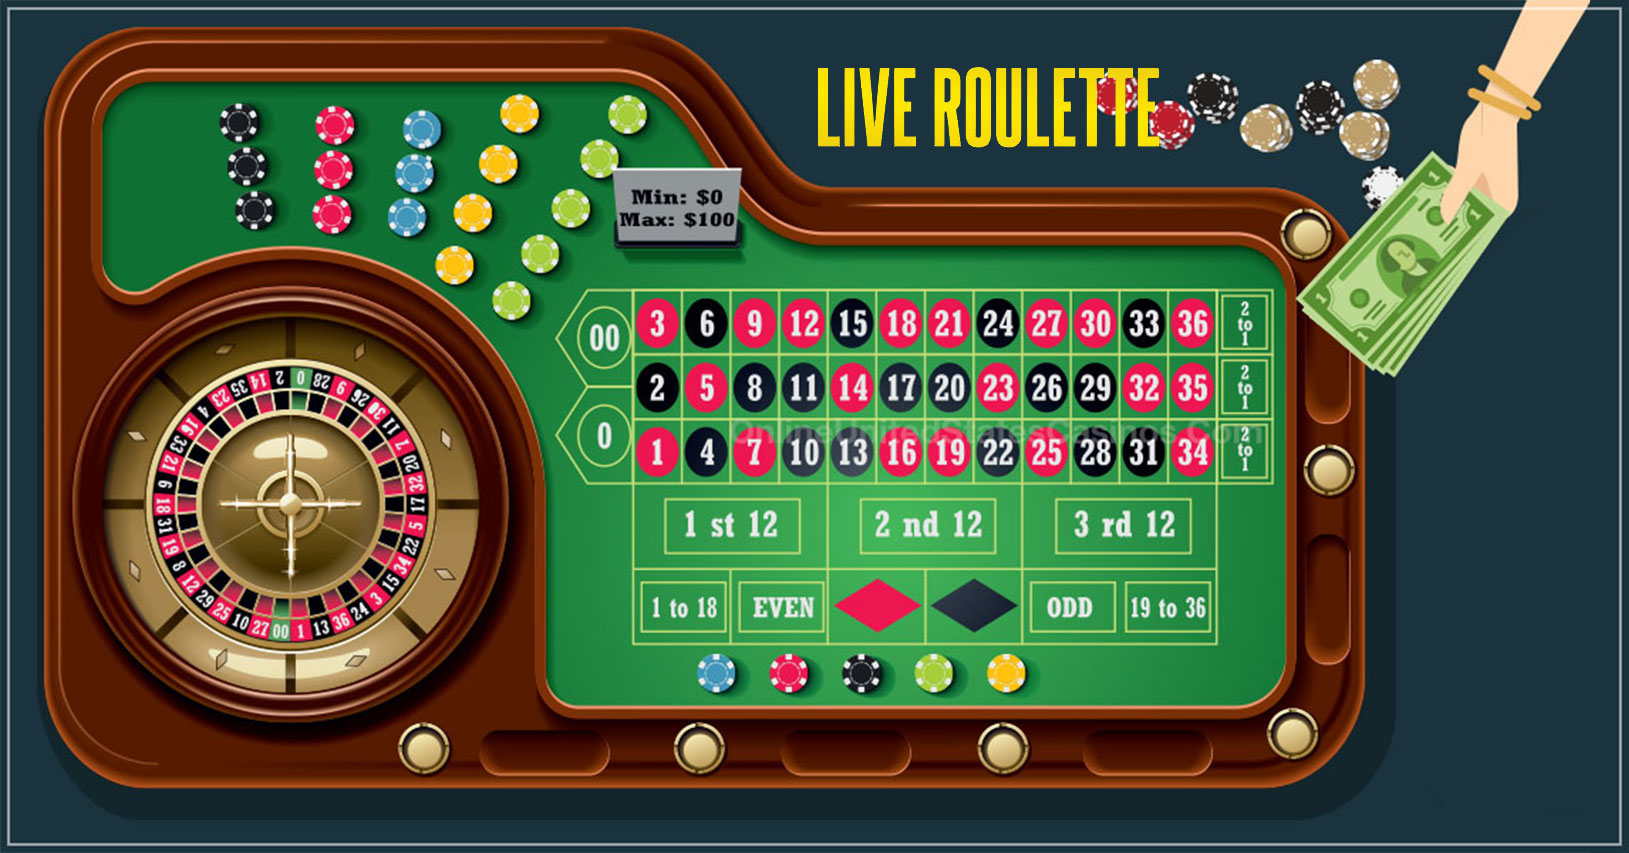 Live Roulette Free Play